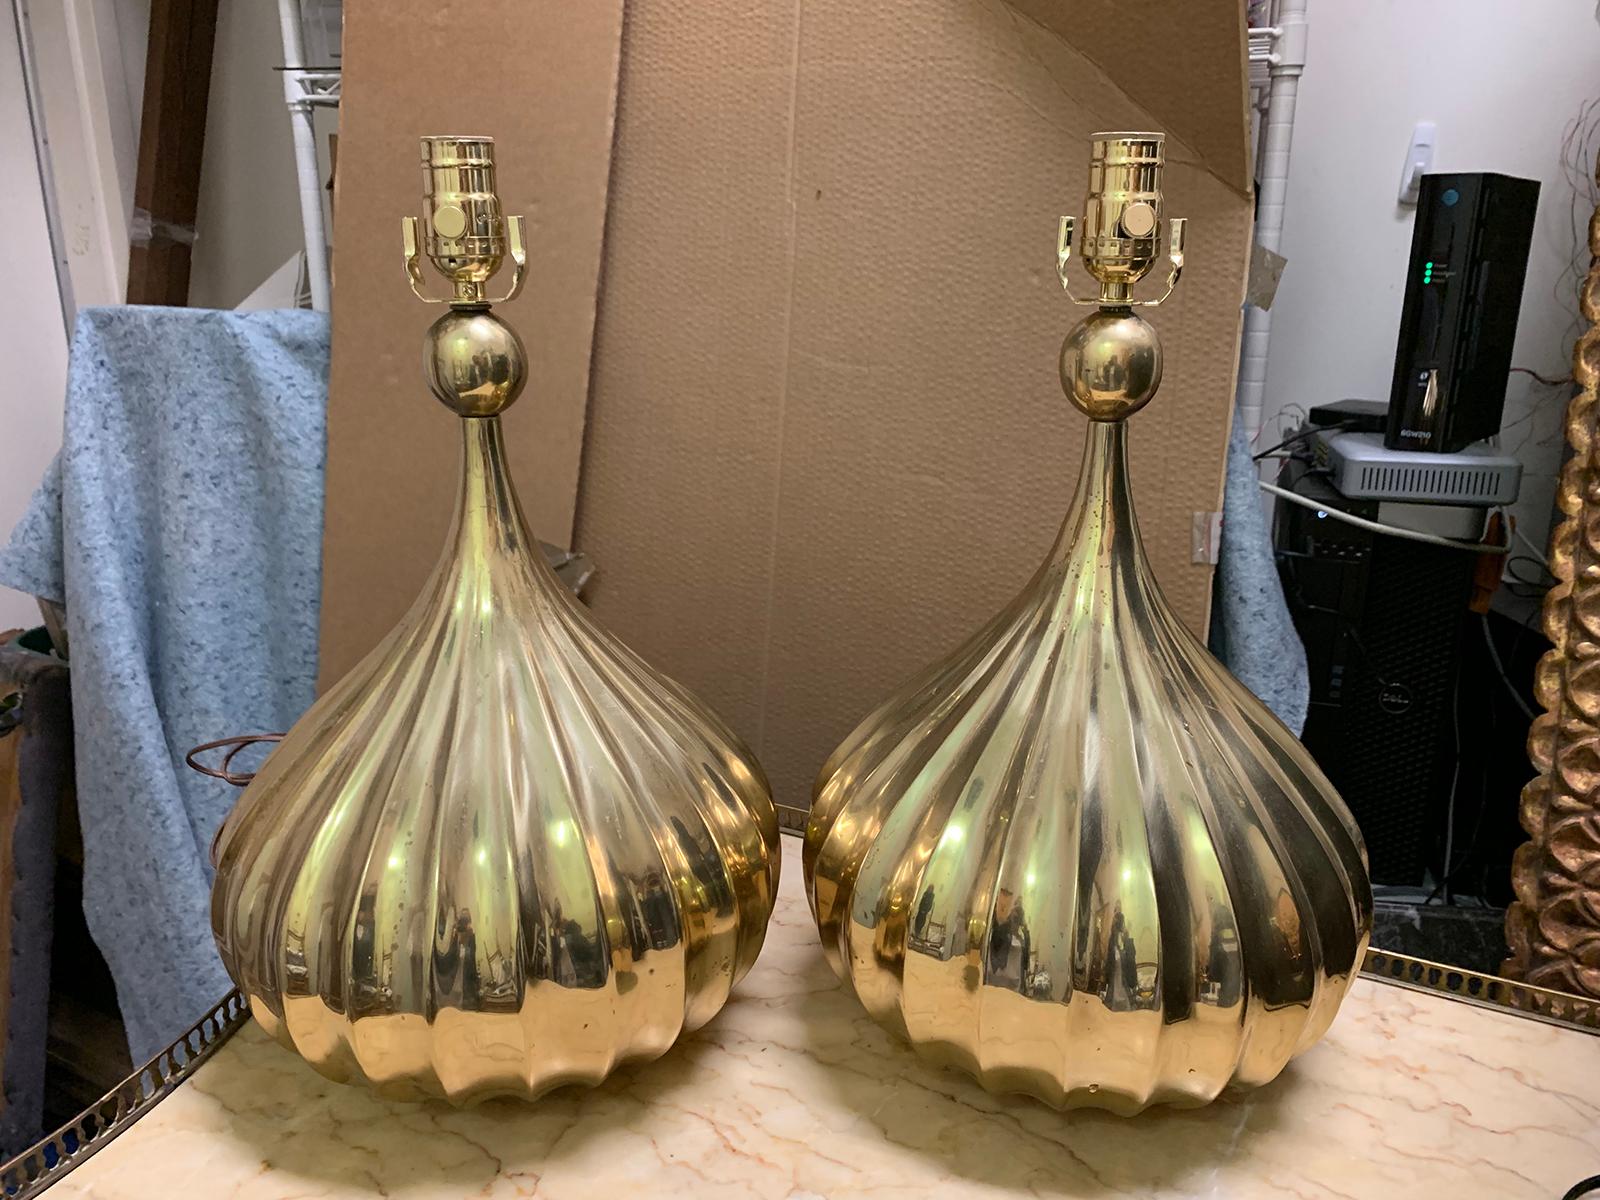 Pair of Mid-20th Century brass lamps
Brand new wiring.